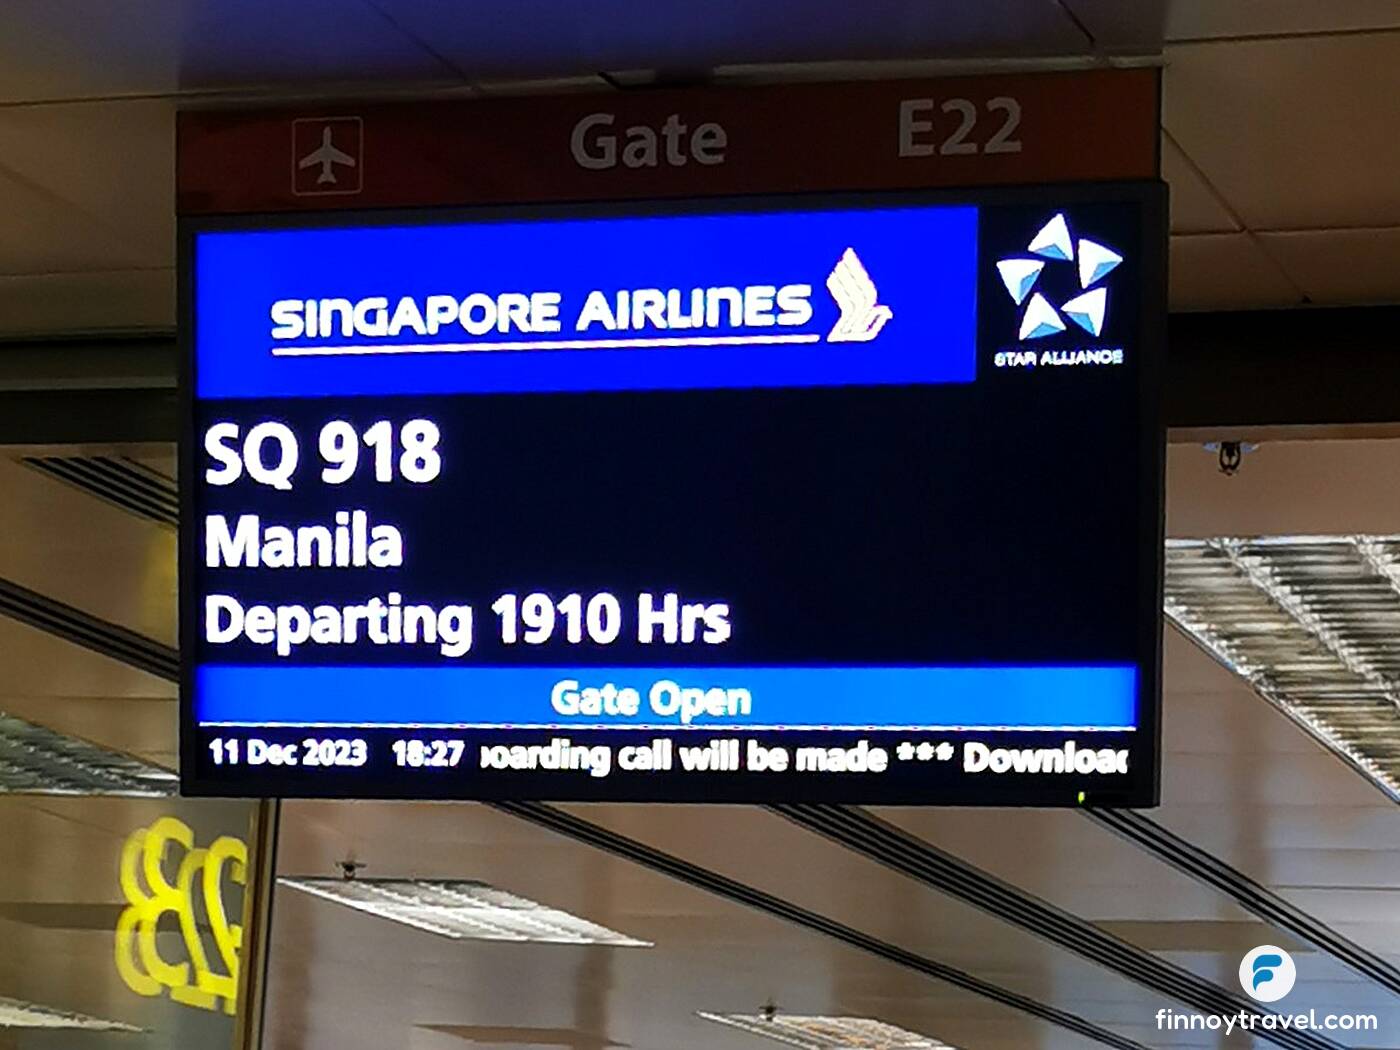 Gate E22 at Changi Airport where Singapore flights leave for Manila